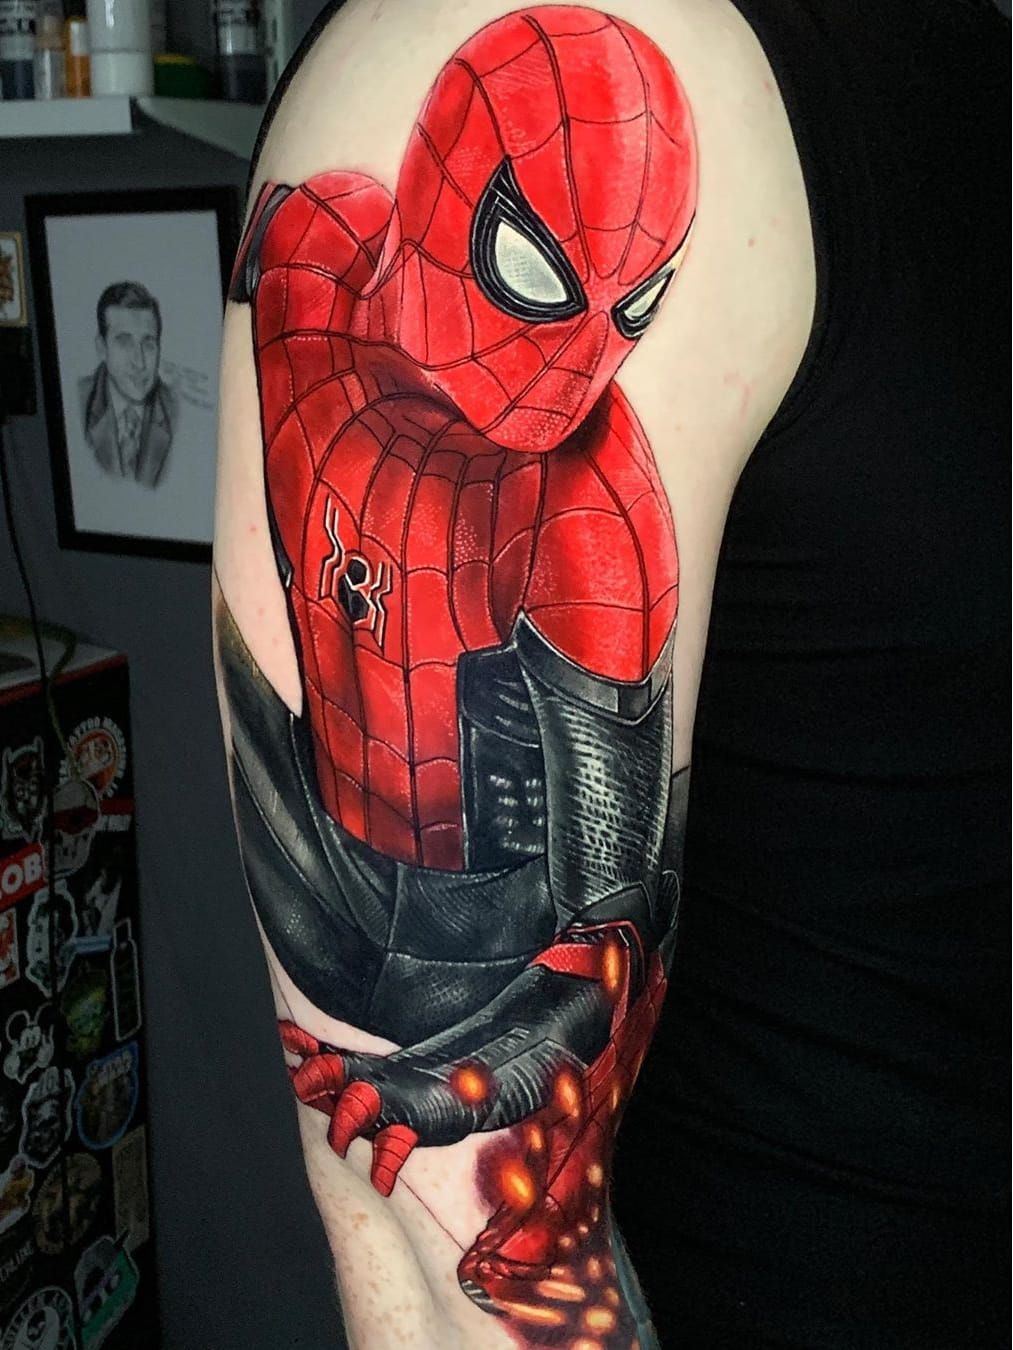 Spiderman hand tattoo by Mick Squires TattooNOW